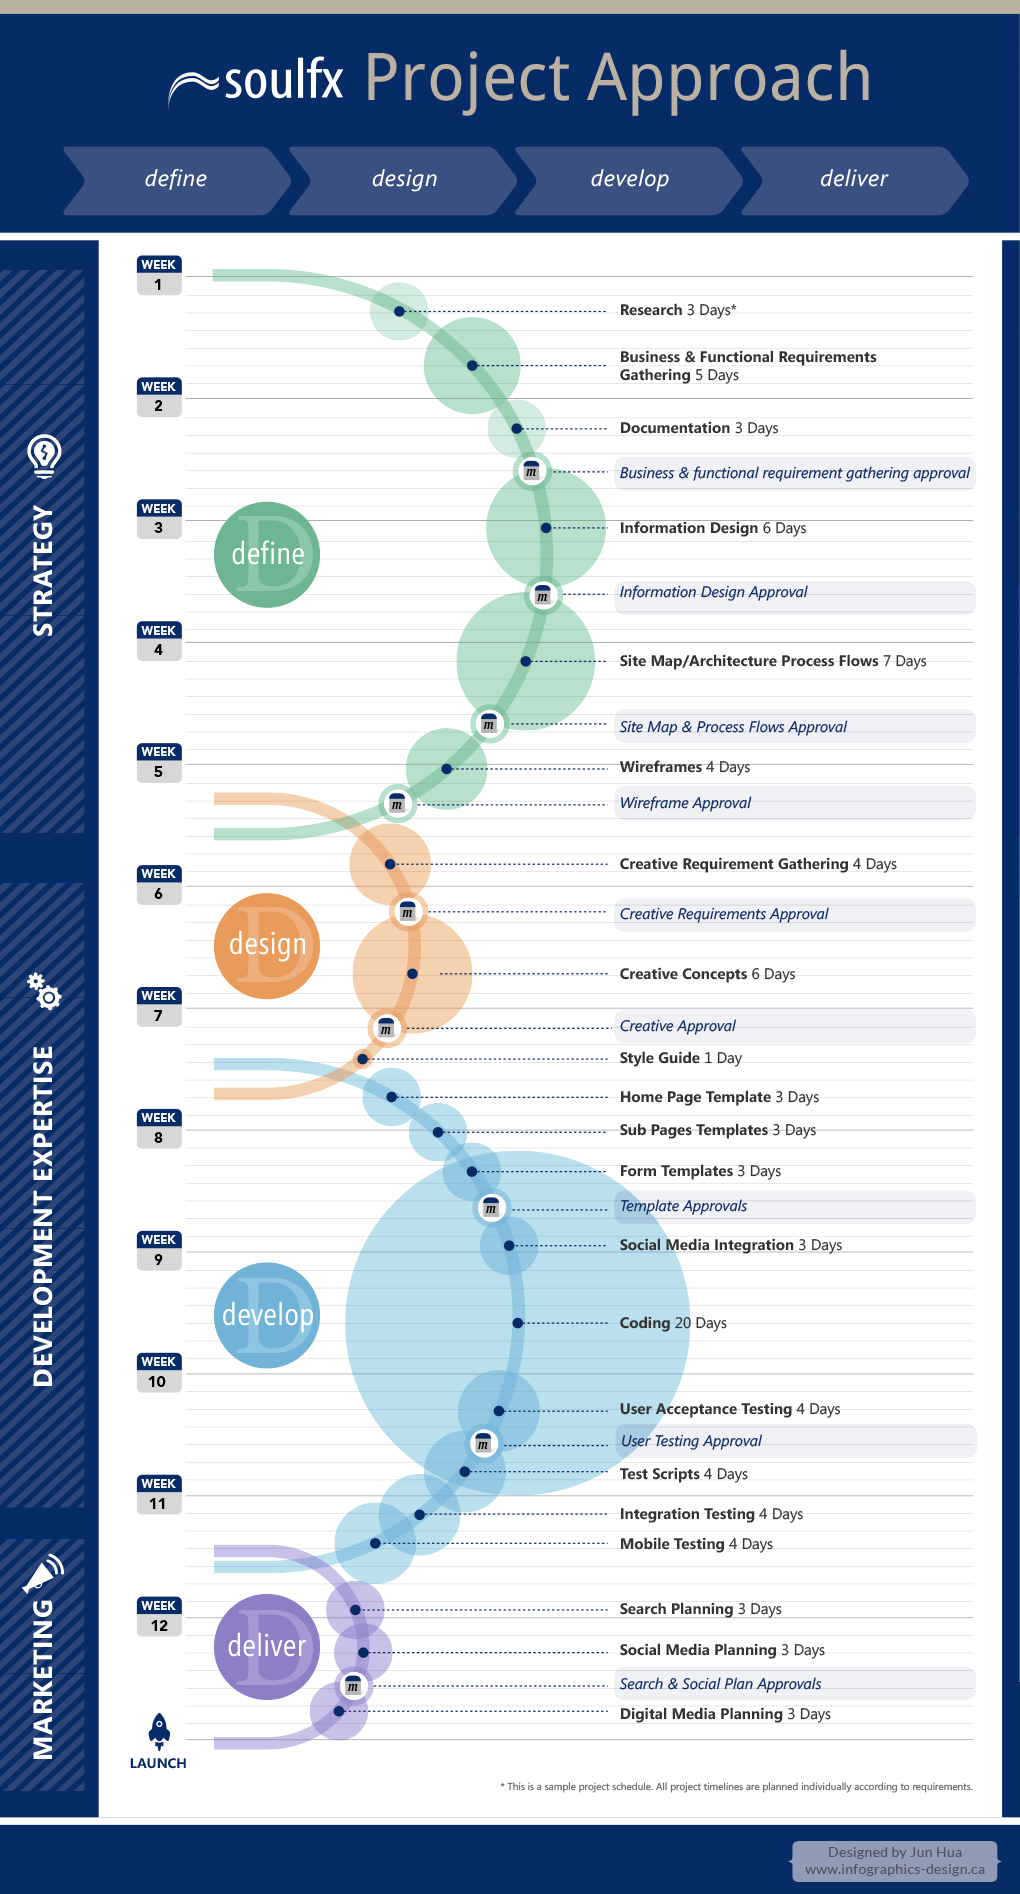 Feature Announcement (2015): The Task Group (Infographic) - Project Management Blog